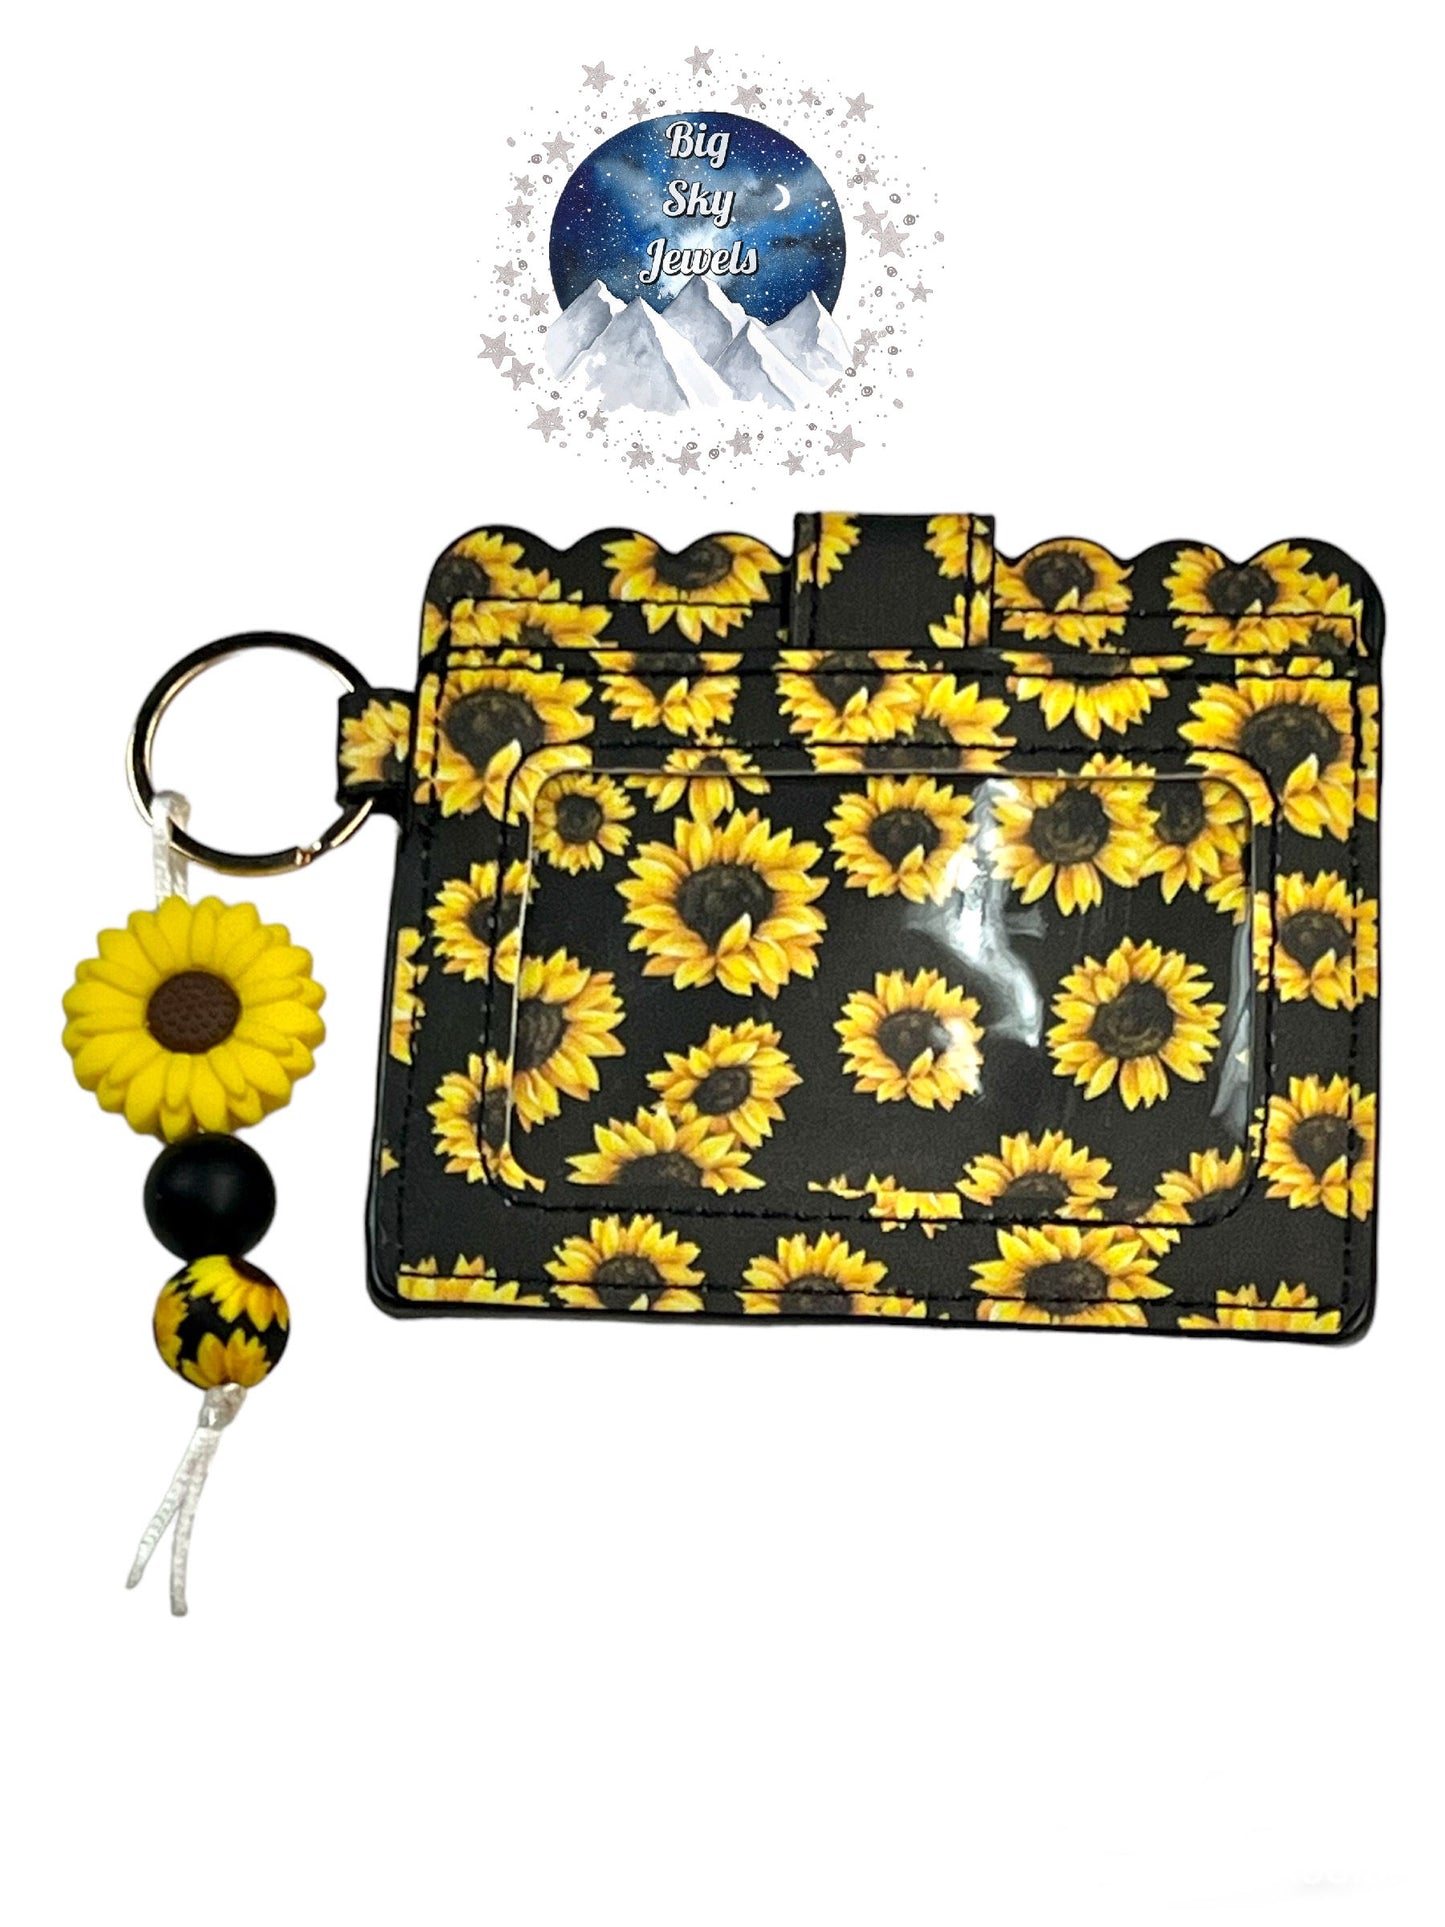 Sunflower Silicone Charm W/Sunflower Wallet ID Card Holder Black & Sunflower Print, Black and Yellow Ages 5+ Kids or Ladies Moms Mother's Day Gift Spring Summer